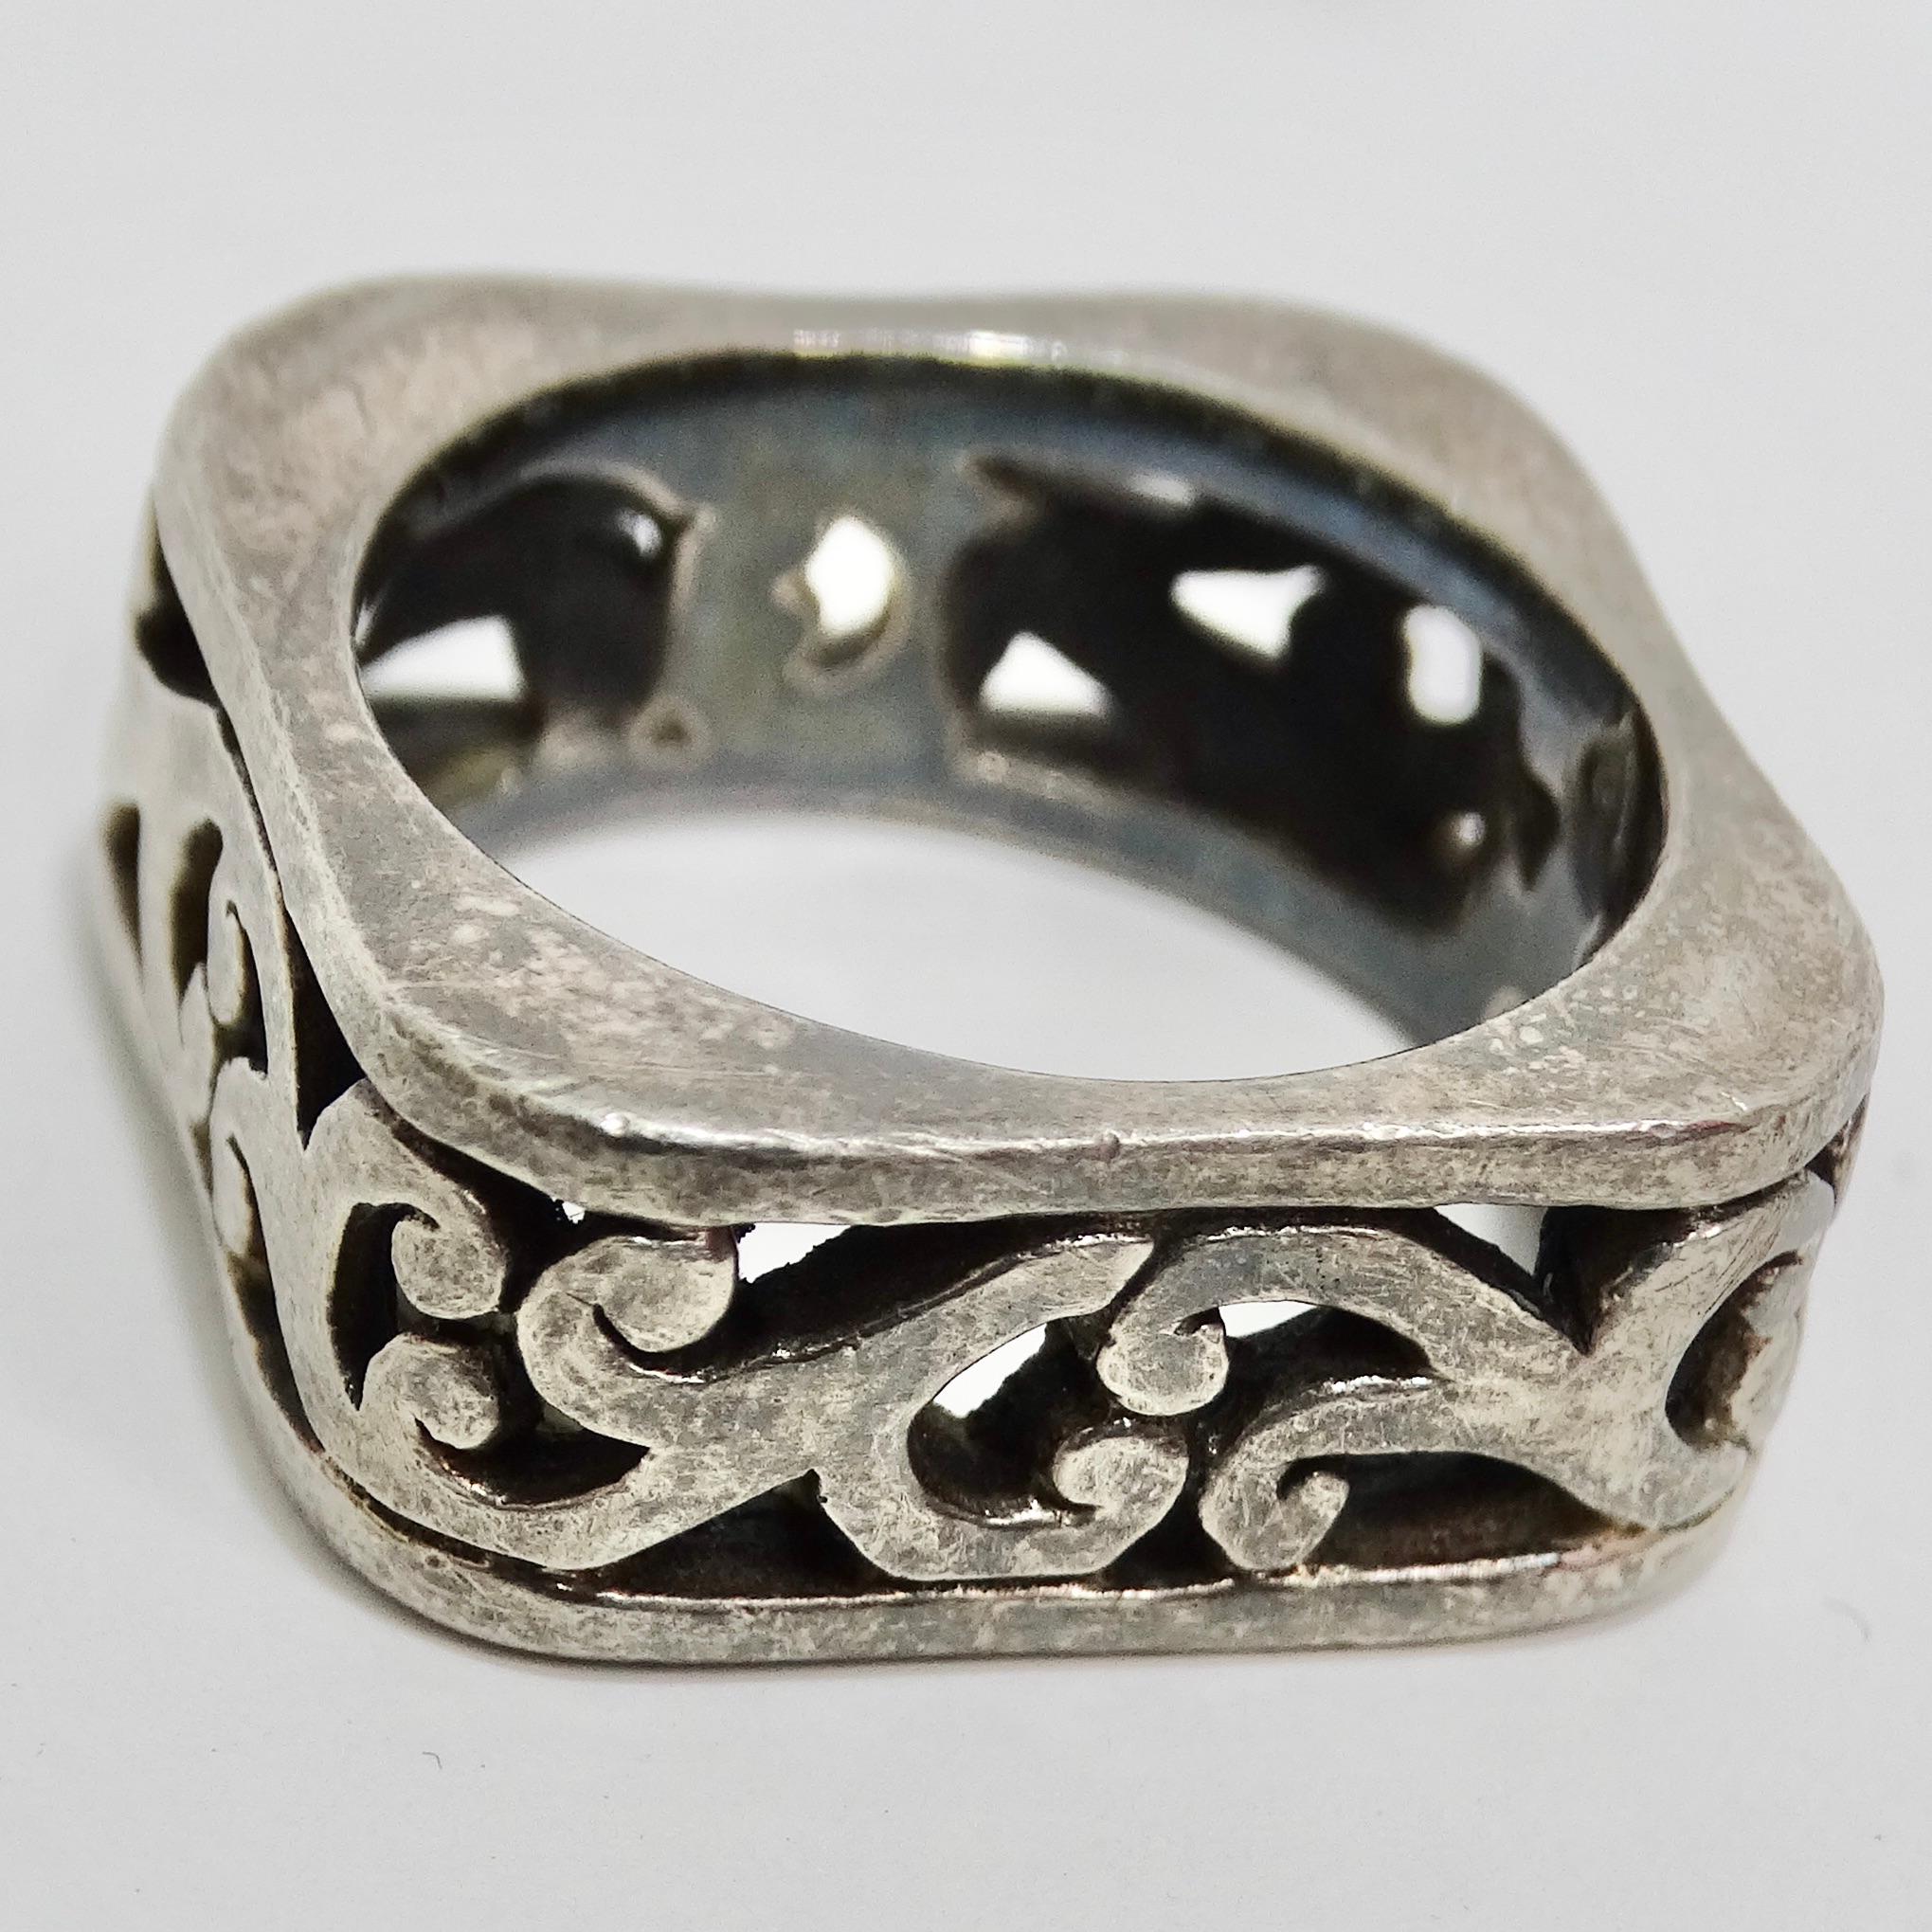 Introducing the 1970s Silver Engraved Ring – a timeless treasure with a touch of vintage allure! This pure silver ring showcases an intricate baroque engraving, making it a distinctive piece that's sure to turn heads. Circa 1970s, it carries a piece